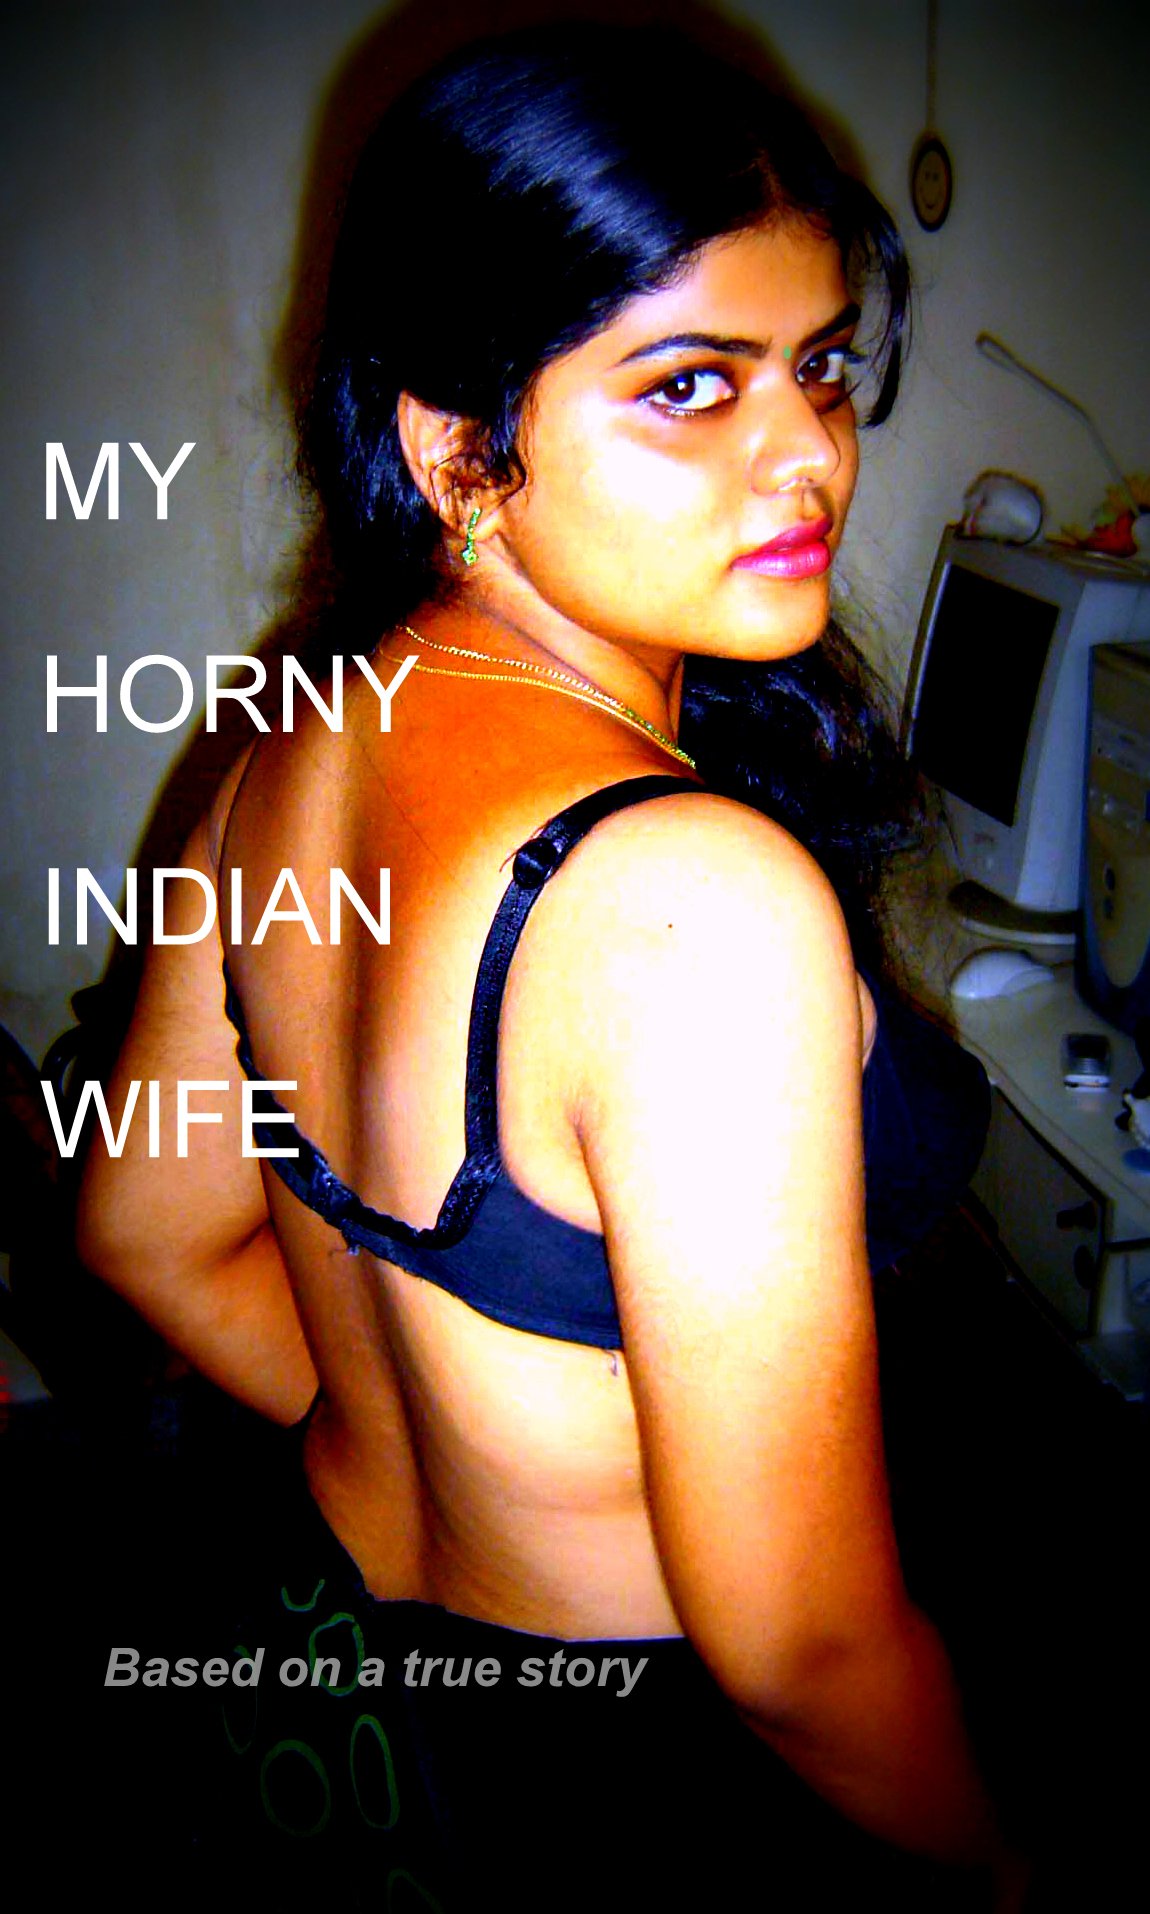 adnan adm add photo horny wife images